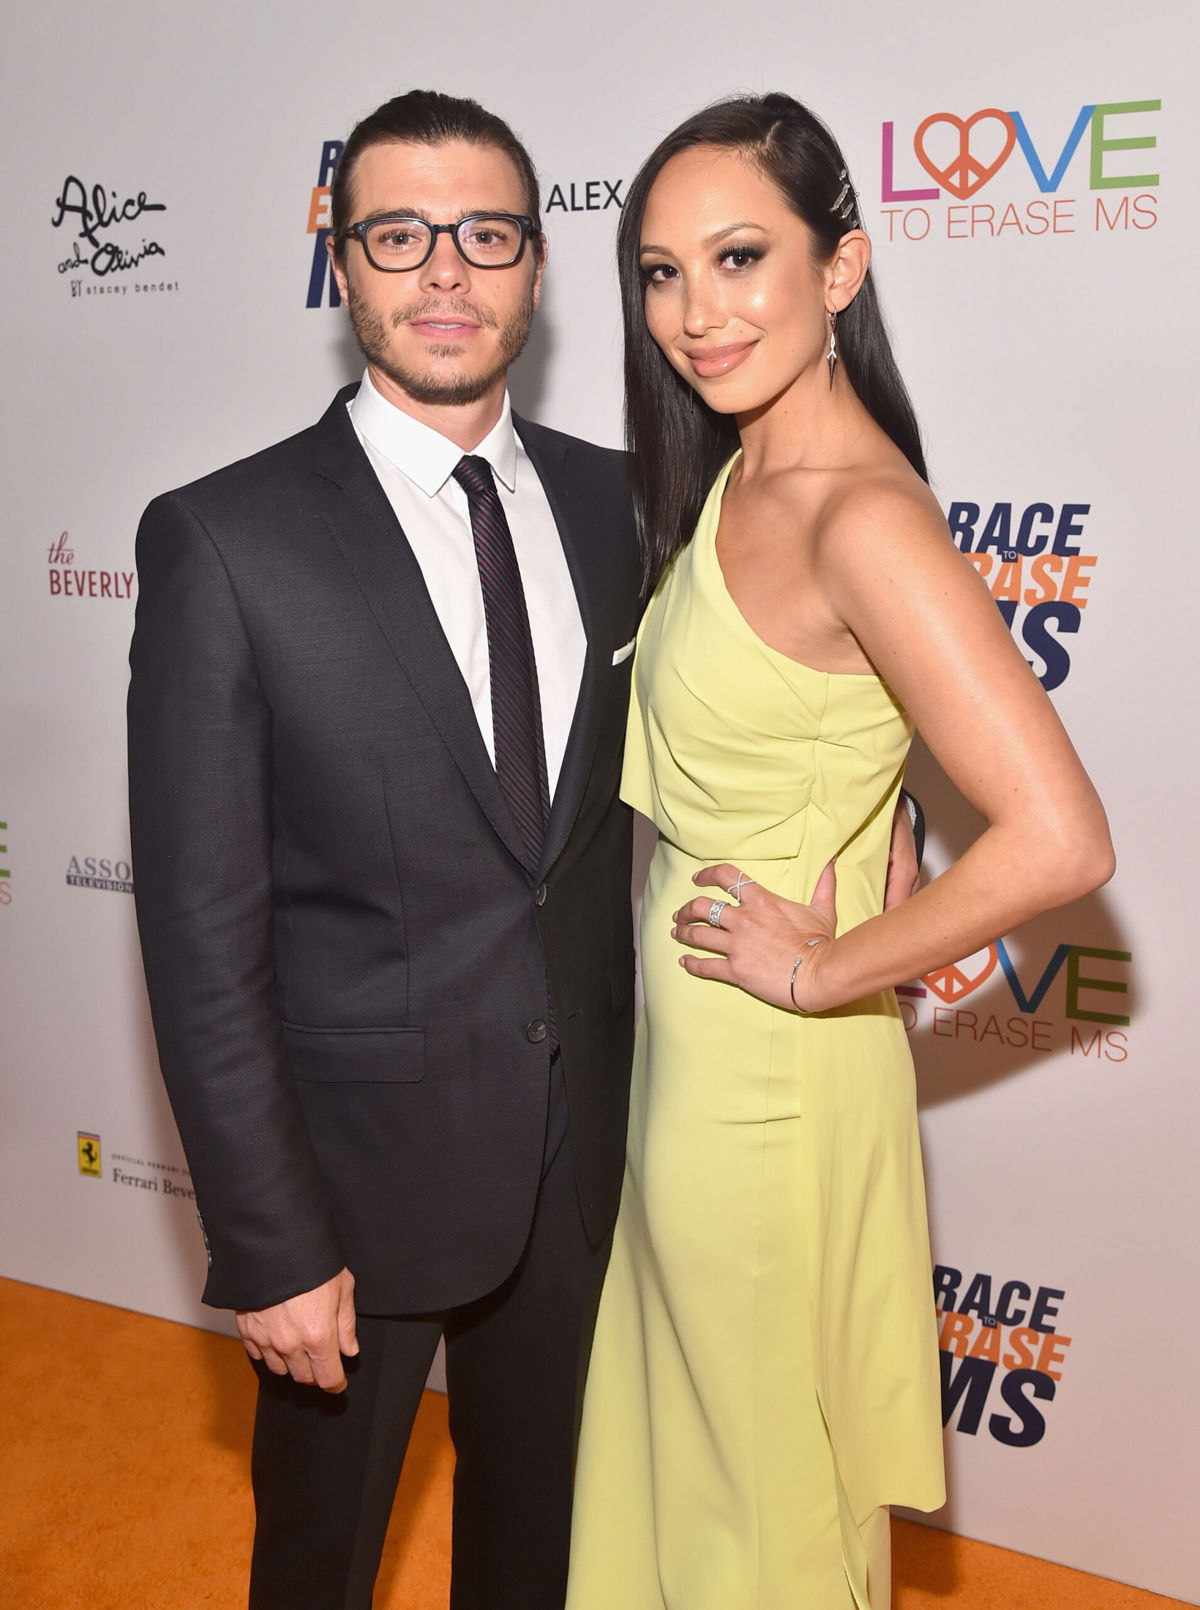 <i>Alberto E. Rodriguez/Getty Images for Race To Erase MS</i><br/>Matthew Lawrence (L) and Cheryl Burke